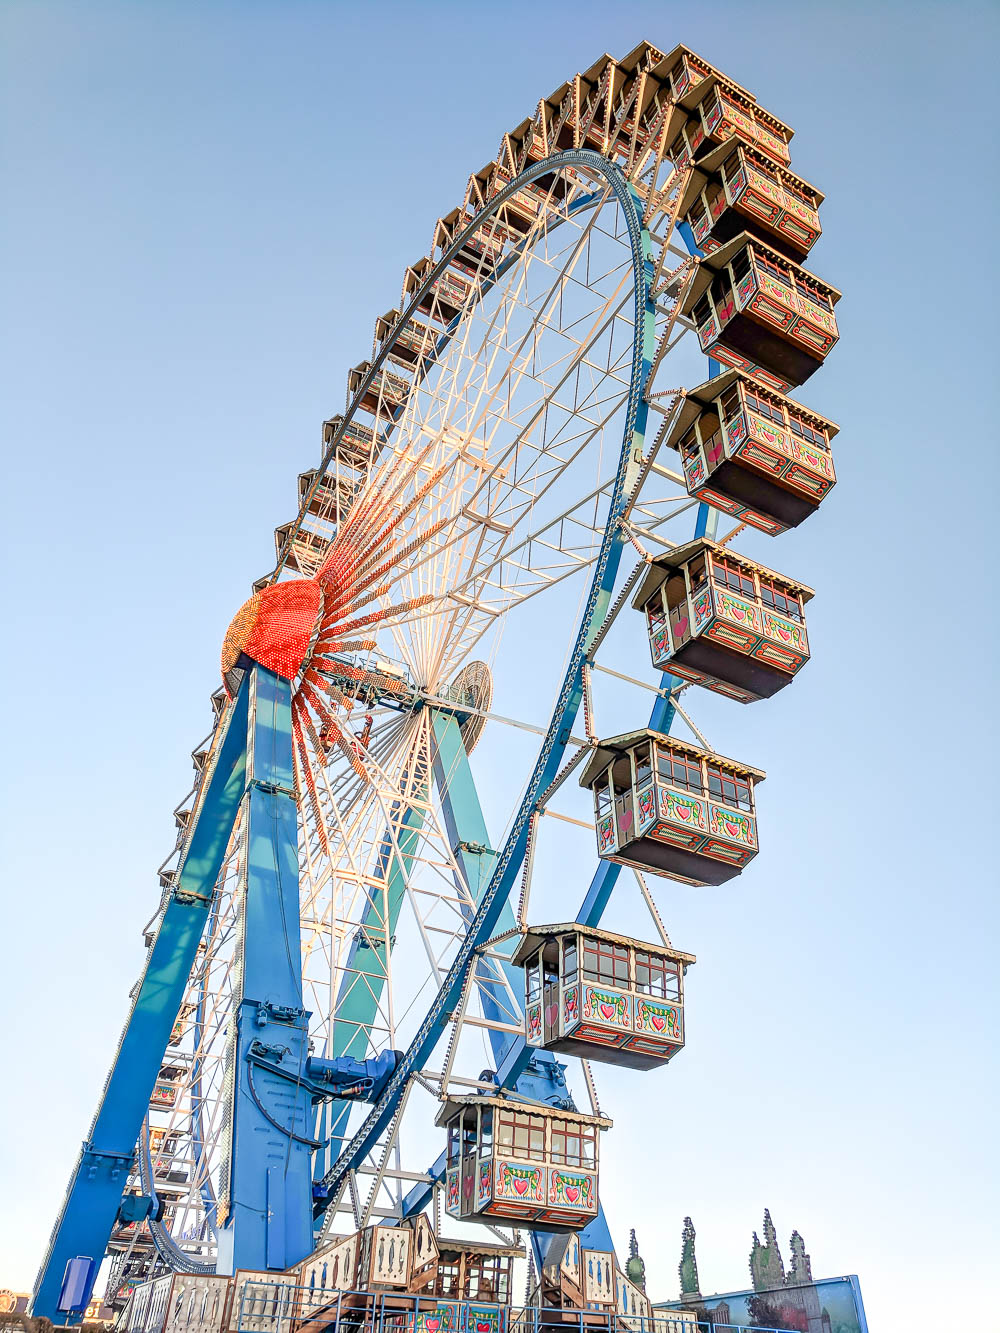 looking up at a big ferris wheel under a blue sky